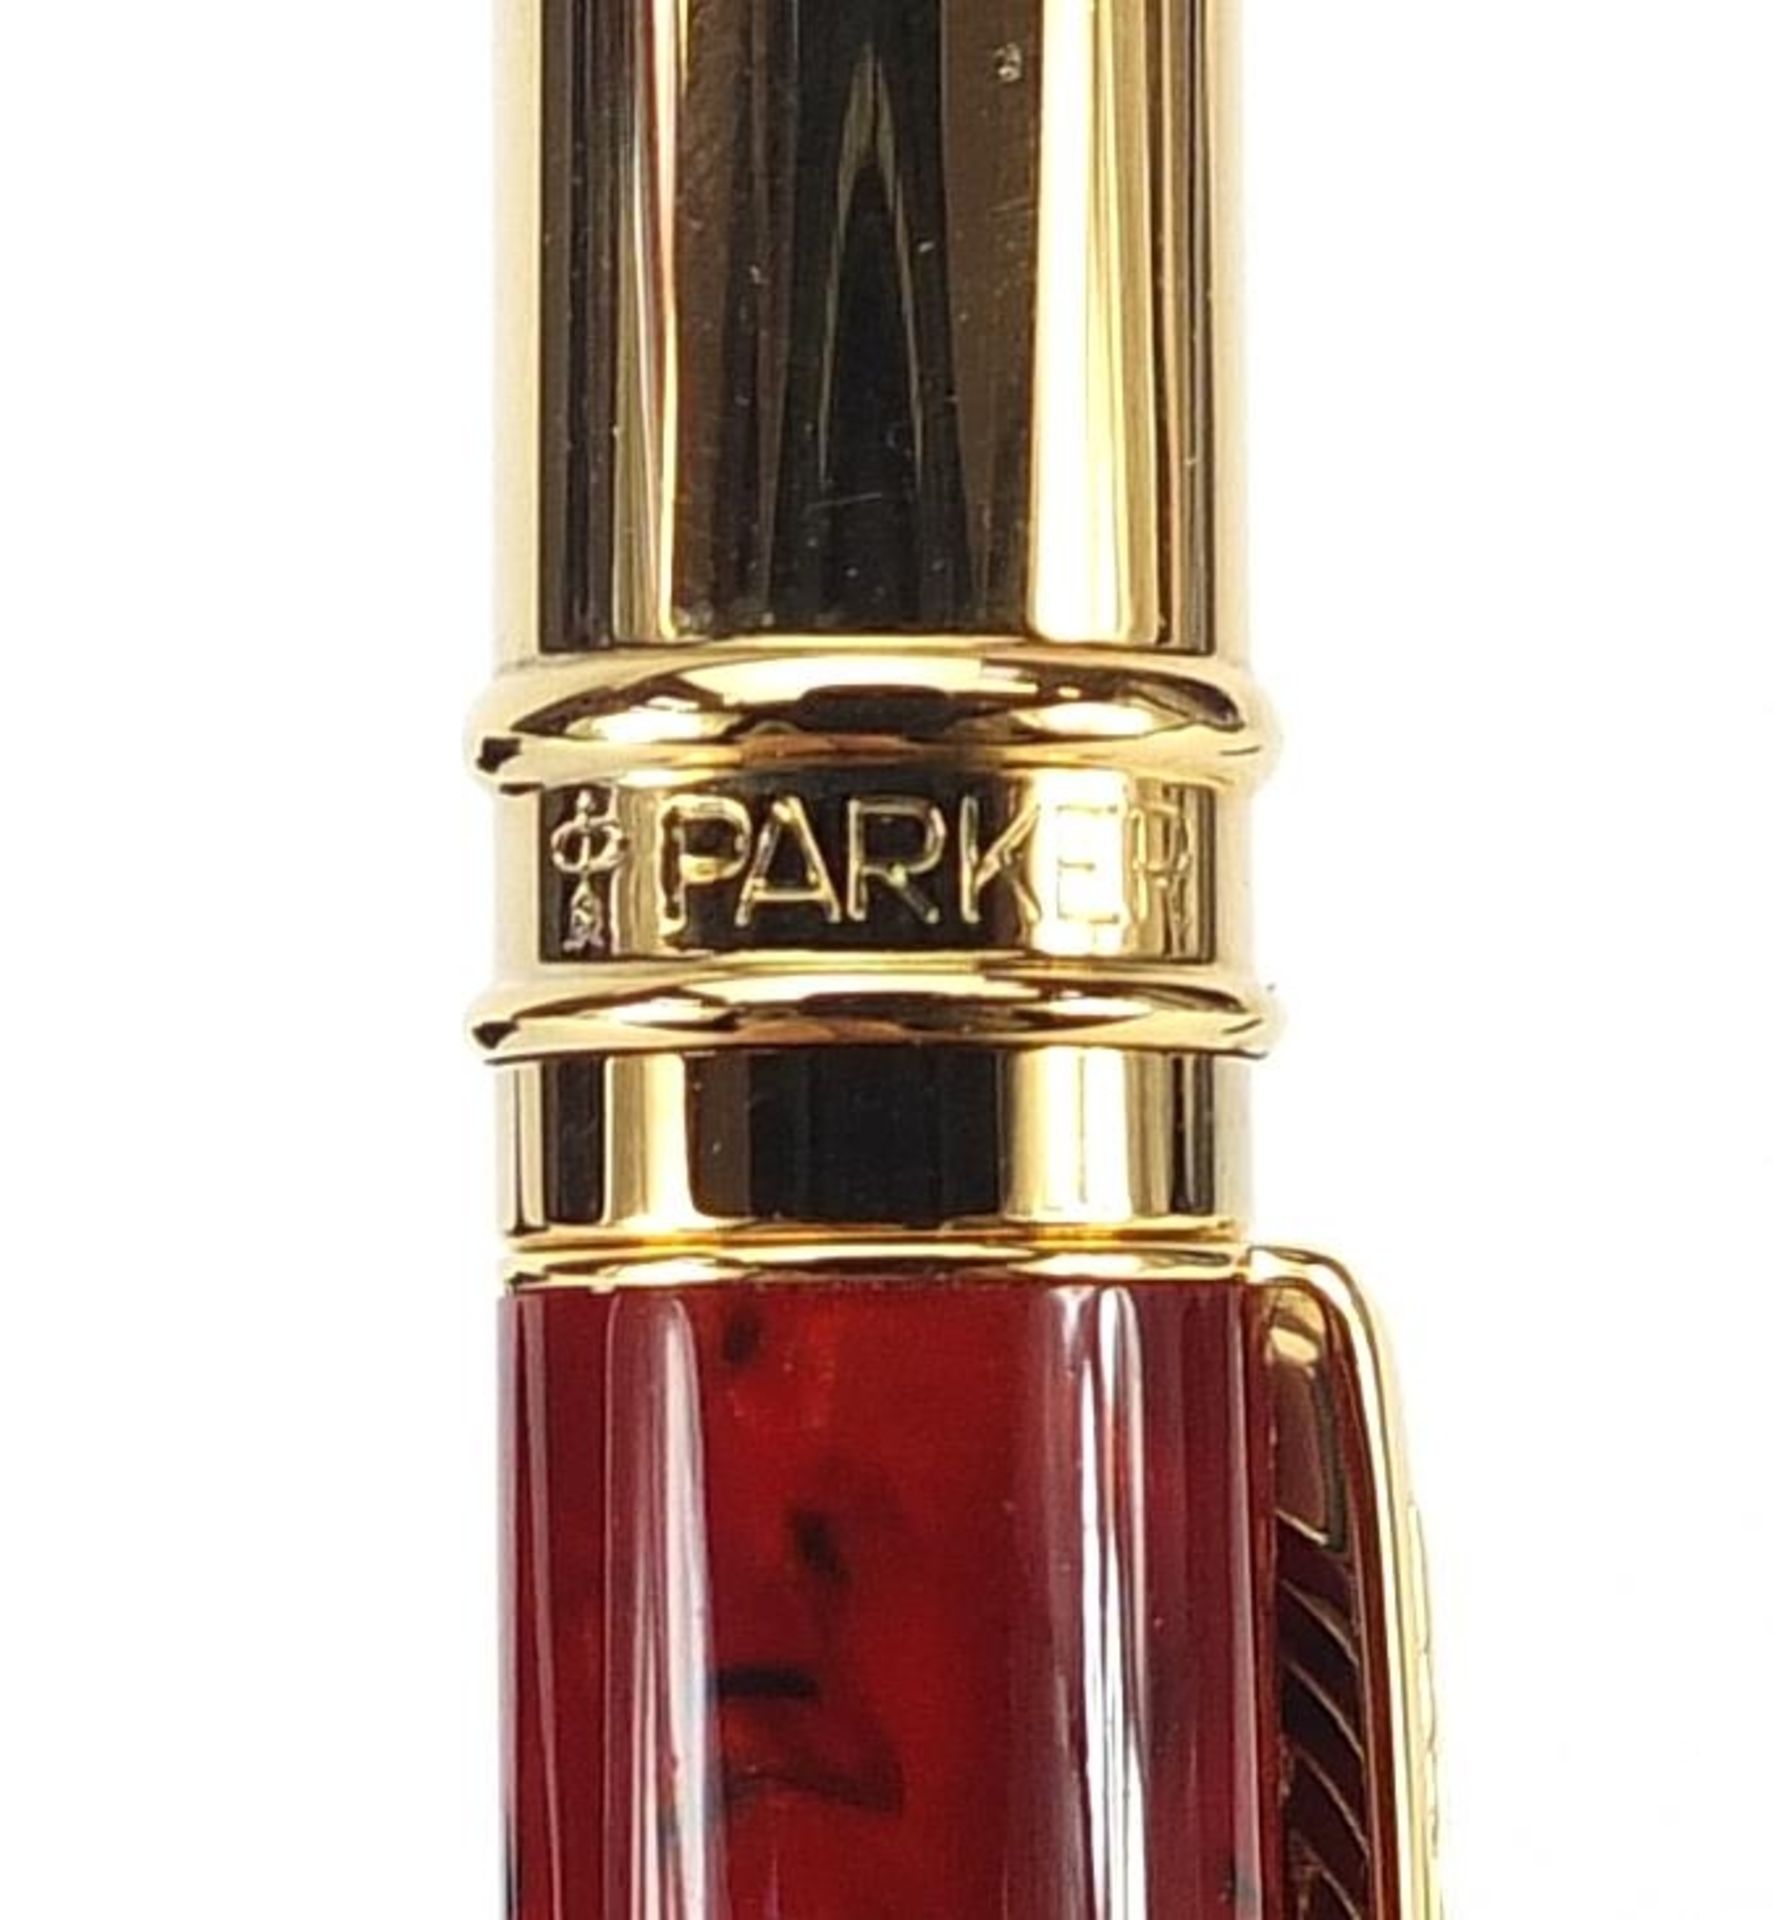 Parker Duofold red marbleised propelling pencil with case and a gold plated bark design fountain pen - Image 4 of 6